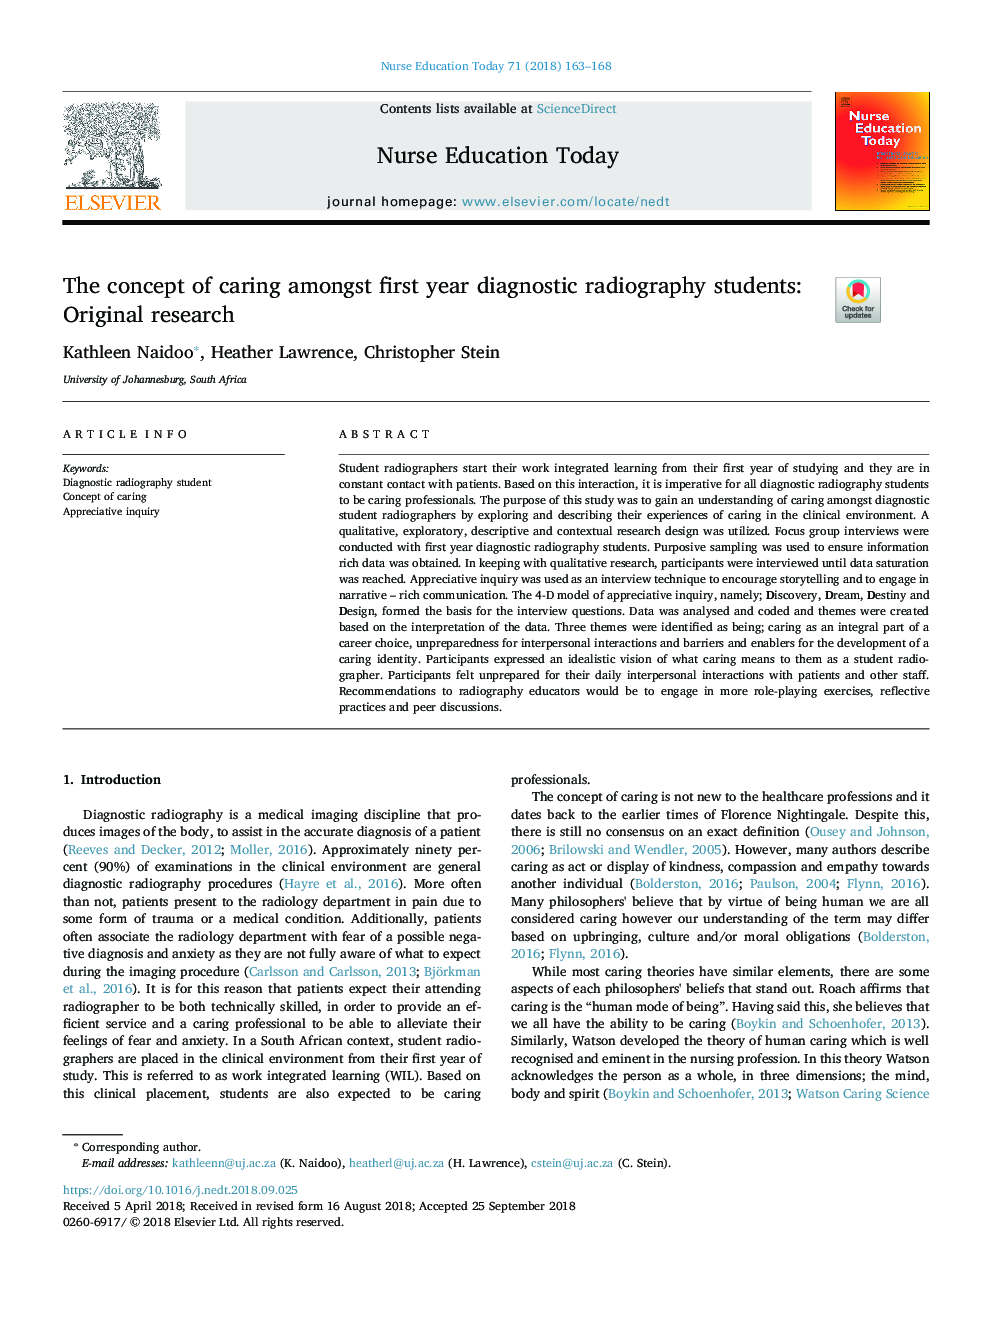 The concept of caring amongst first year diagnostic radiography students: Original research